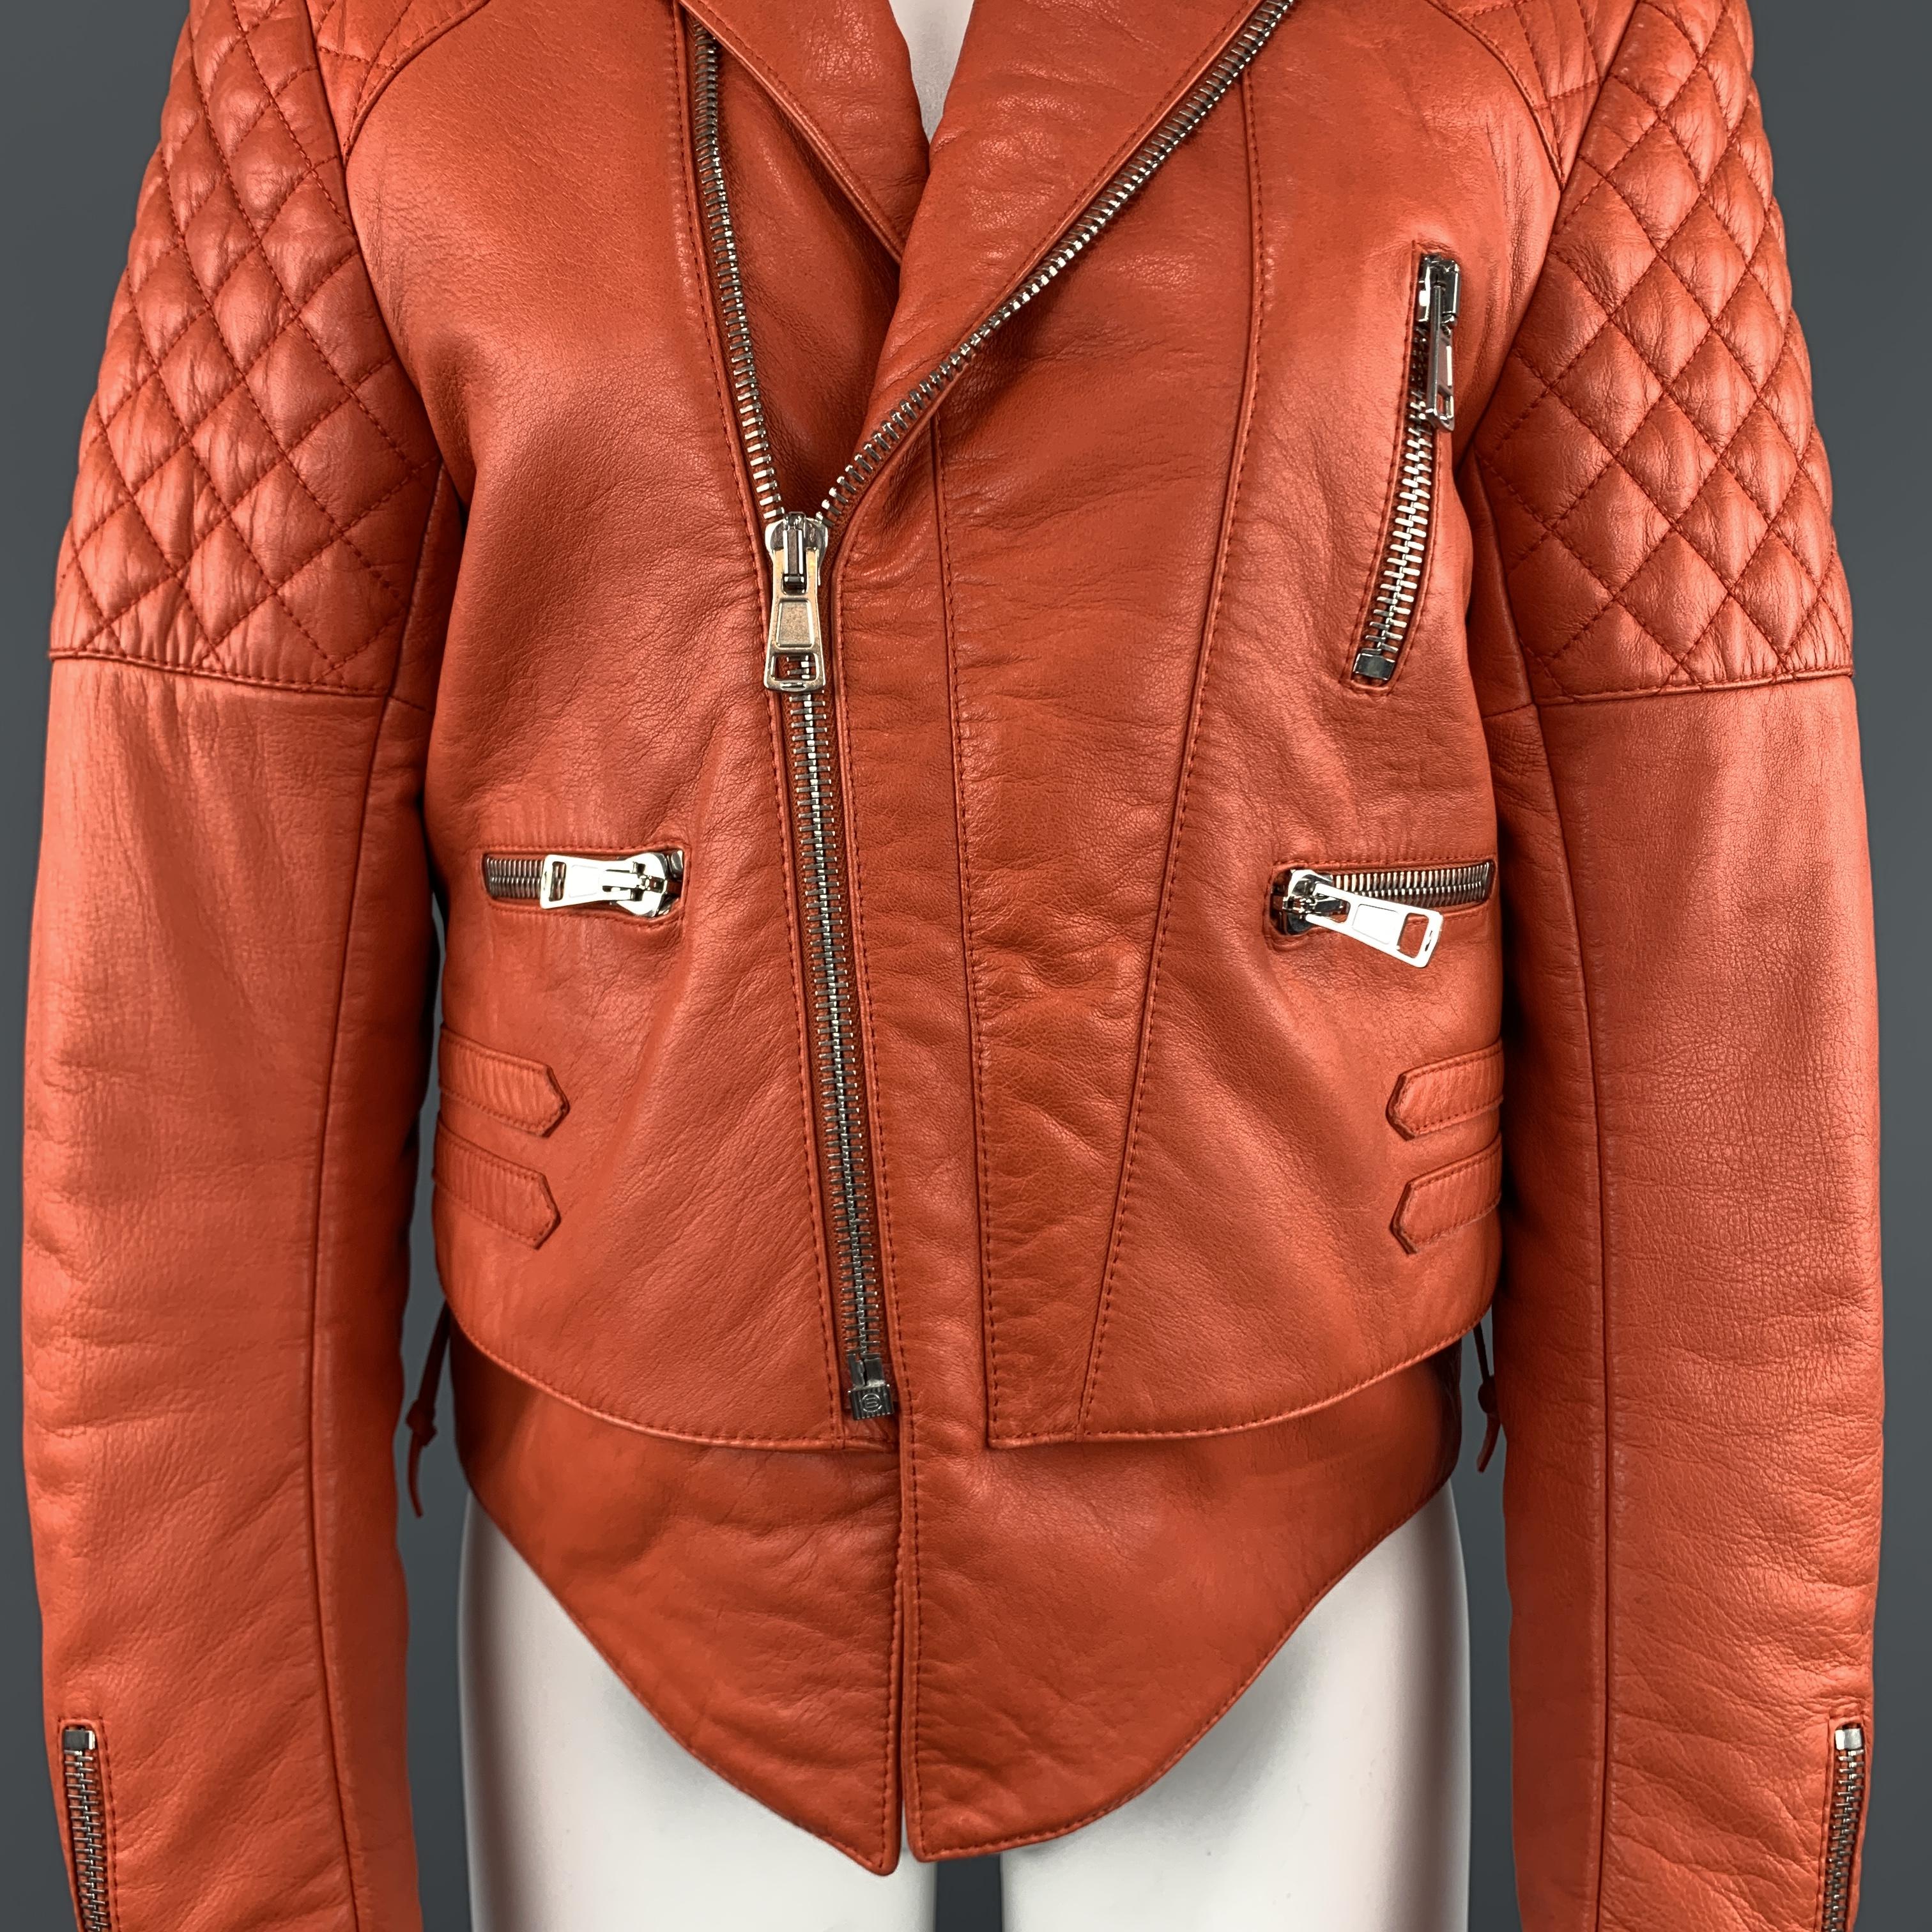 balenciaga moto jacket sizing Today's Deals- OFF-53% >Free Delivery